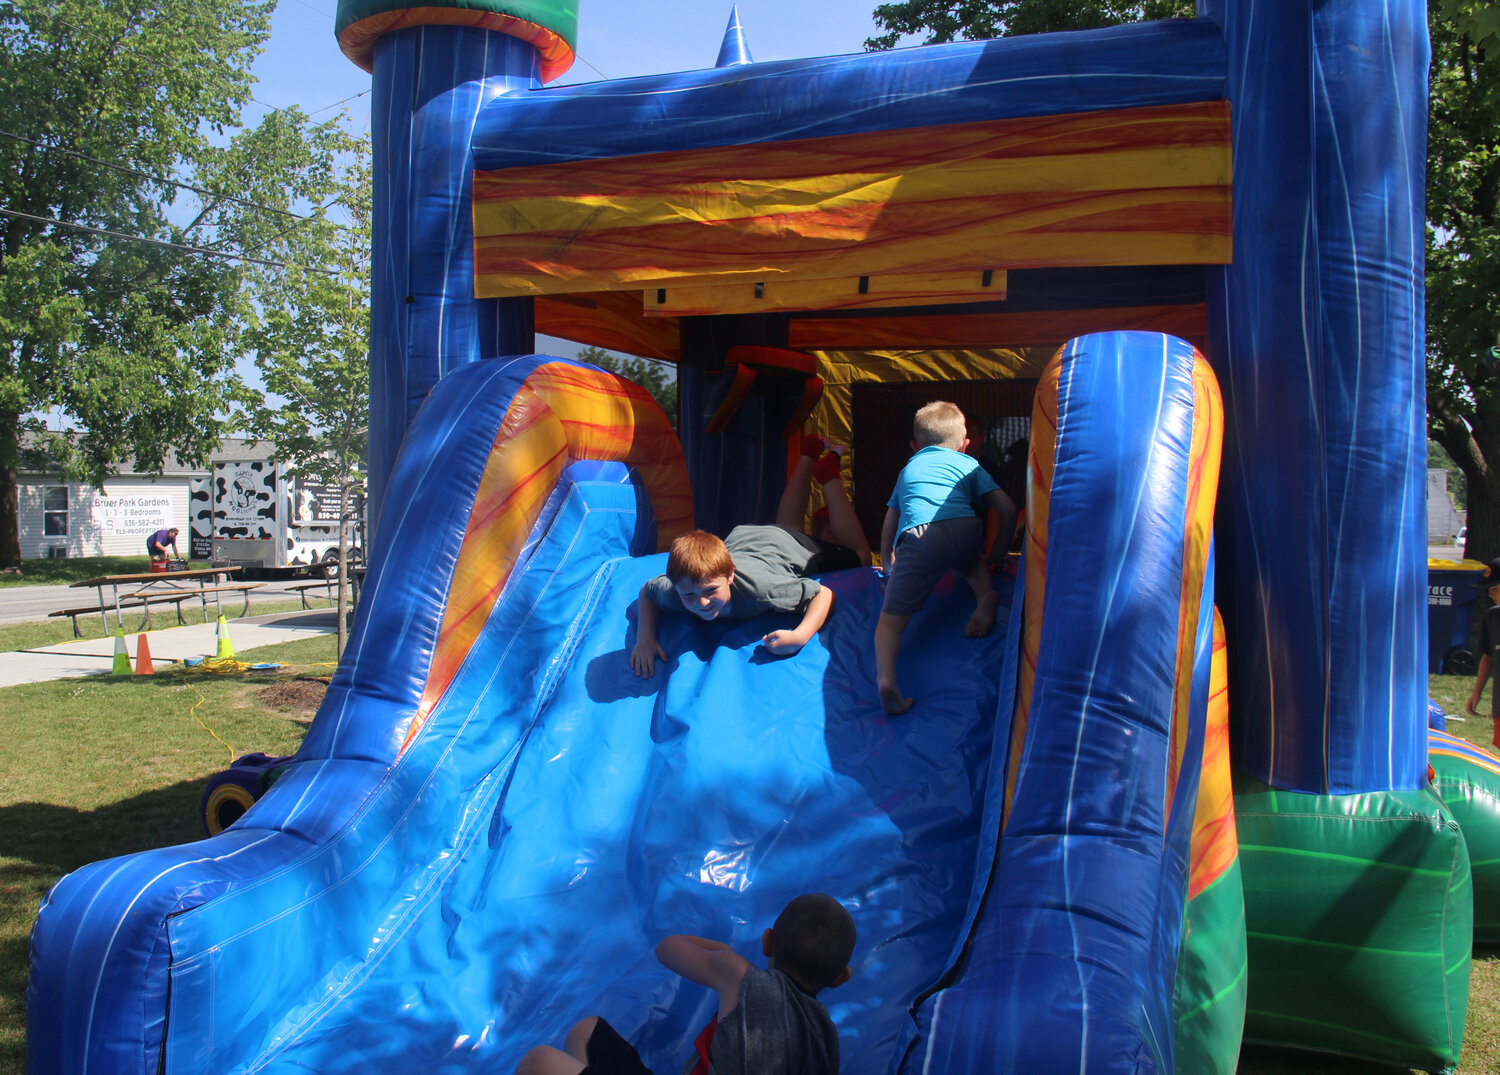 Kids enjoy the bounce-house slide on a warm Saturday afternoon in Truesdale during Summerfest.